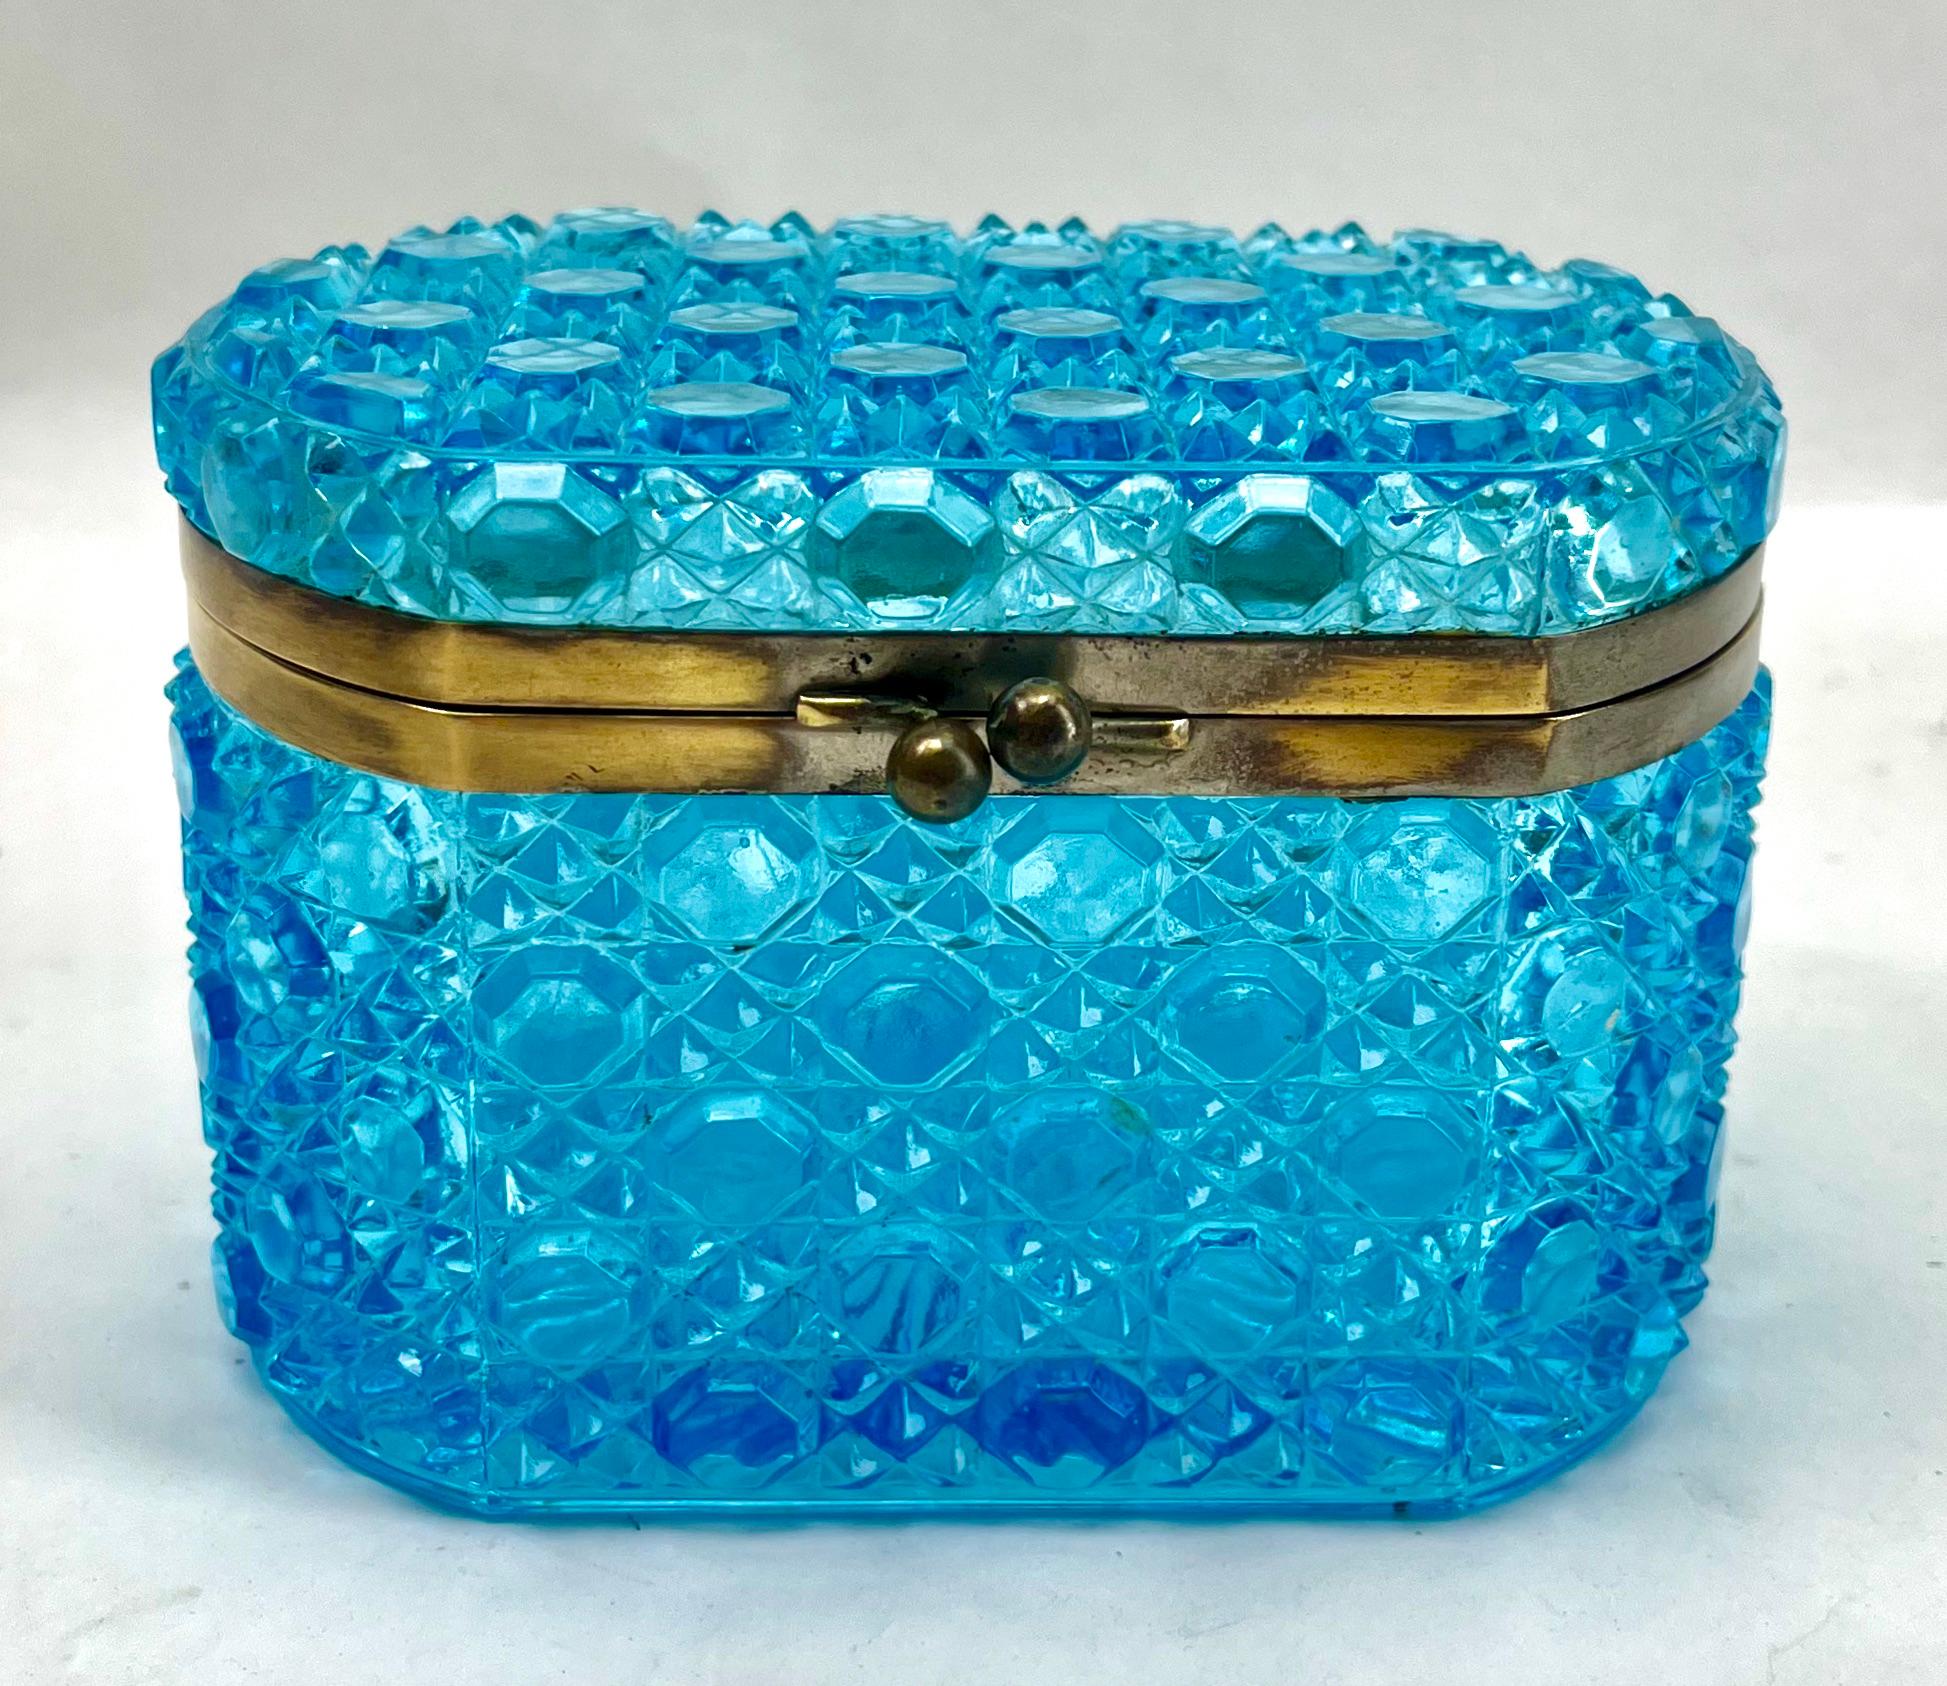  Baccarat French Cut Crystal Jjewelry Box with Brass Hardware.

A gorgeous French hand cut crystal jewelry box.
The box although is unsigned can be attributed to the Baccarat style. 
The design reminds one of the Hollywood Regency elegance. 
This